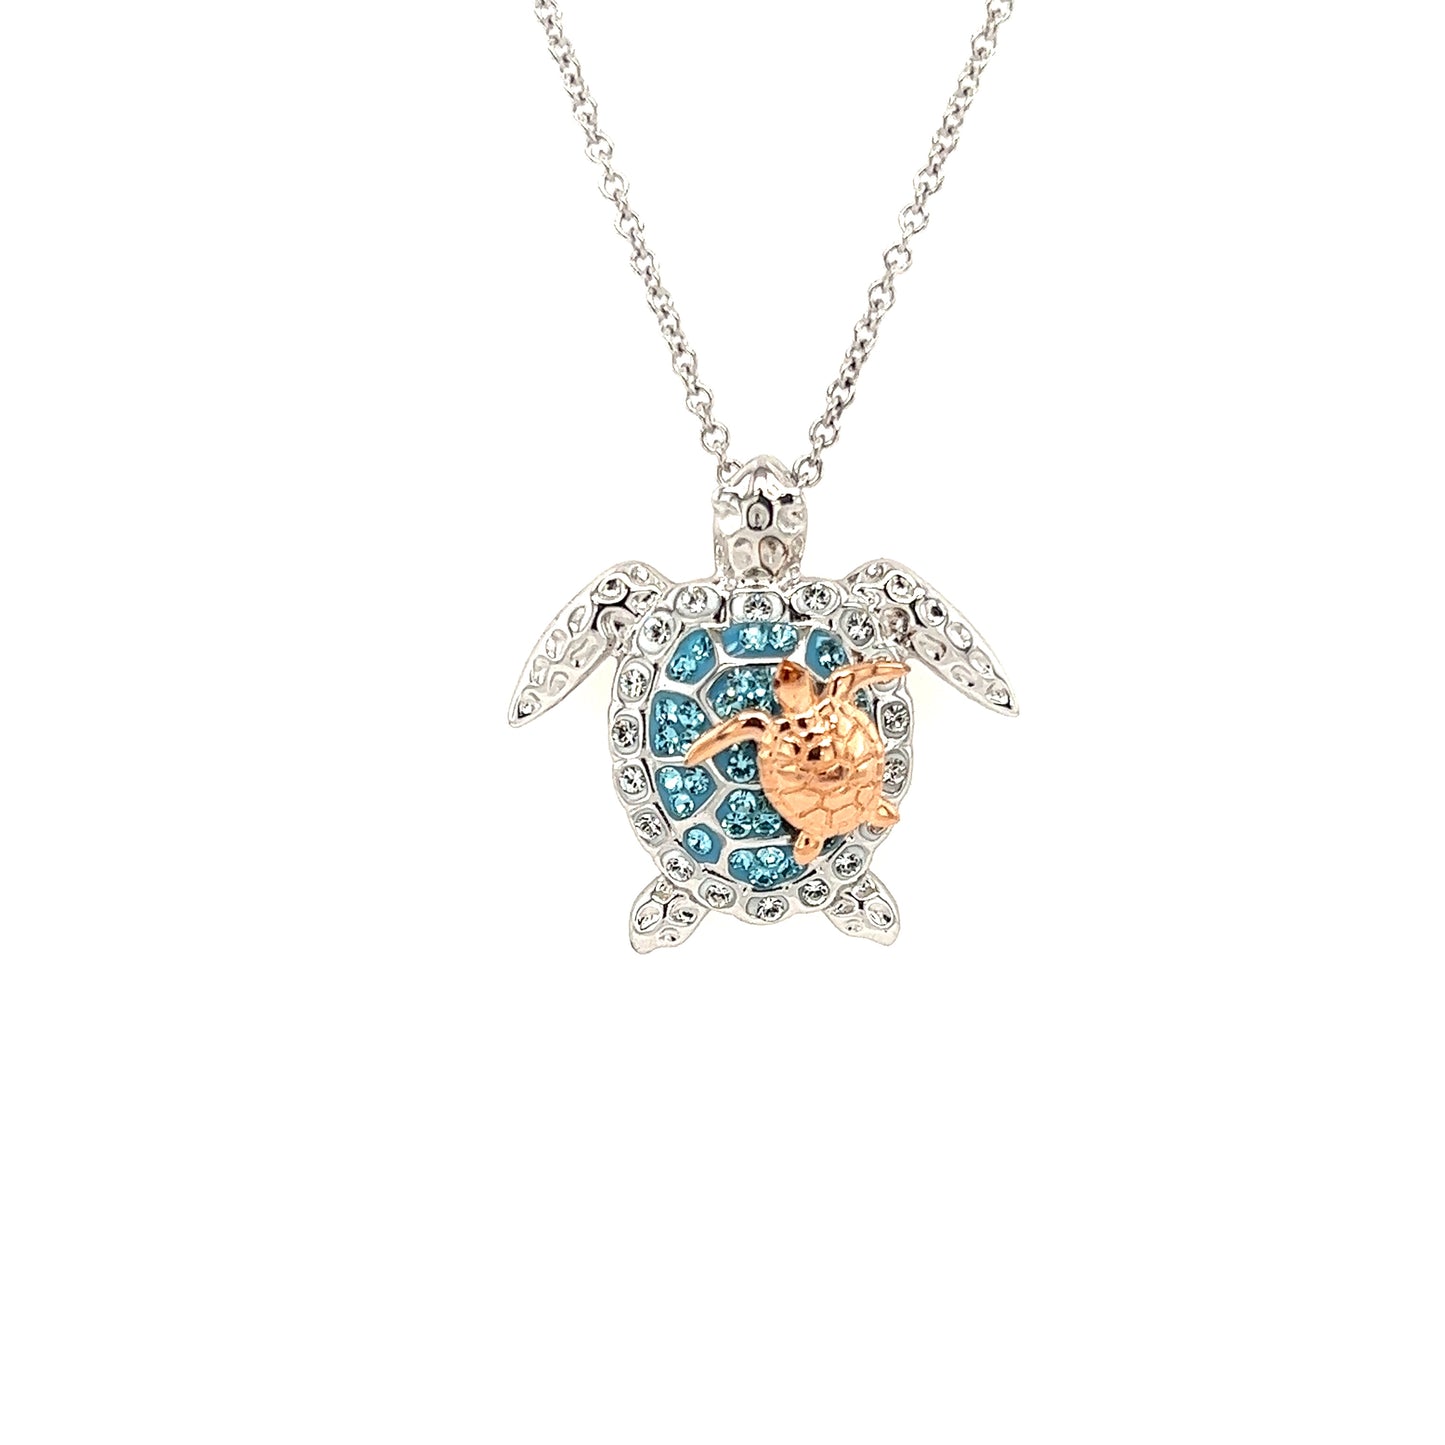 Sea Turtle Necklace with Rose Gold Accent in Sterling Silver Pendant View